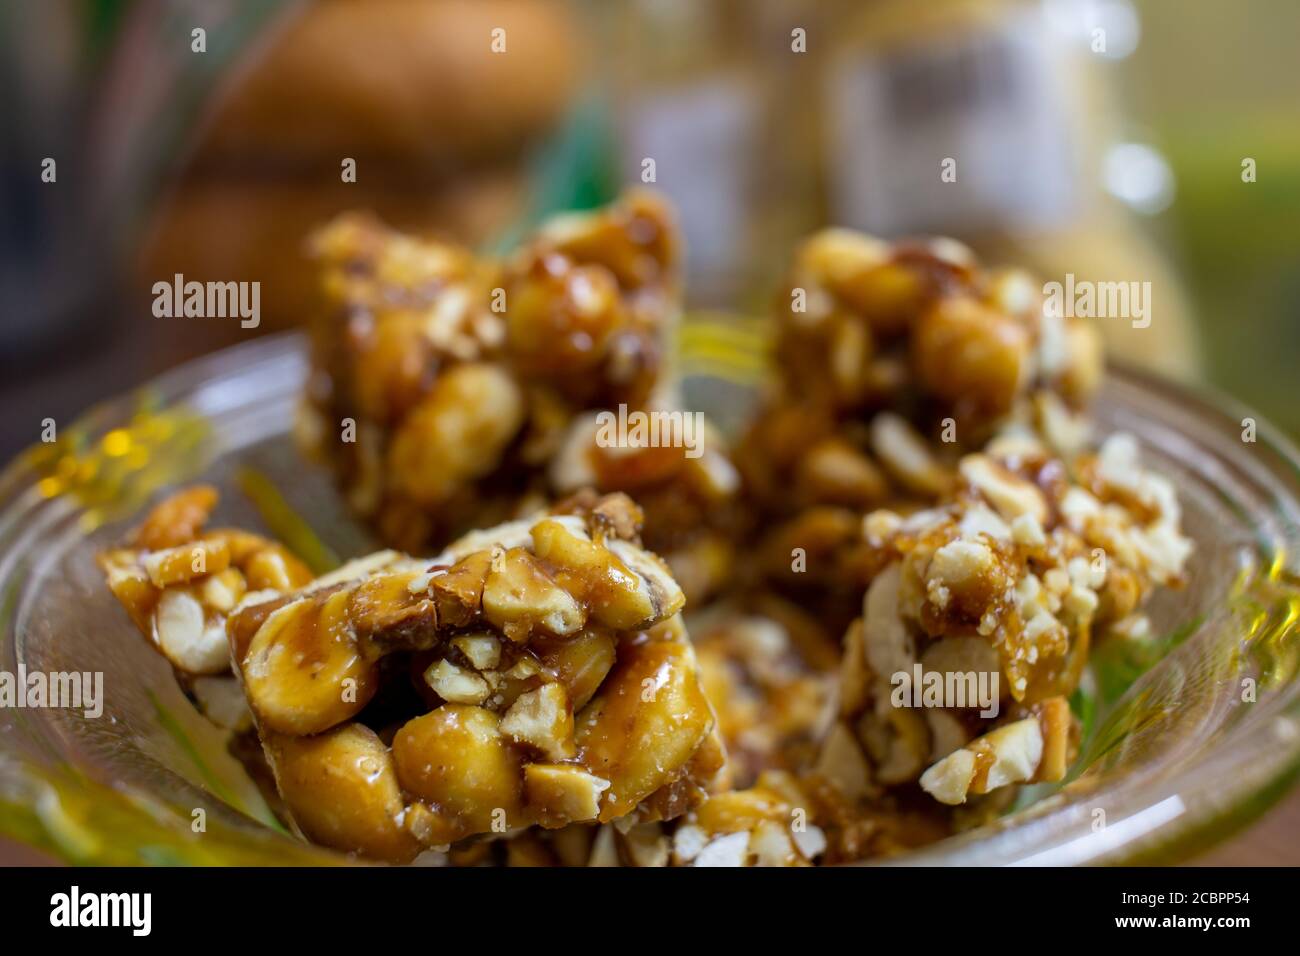 View of Chikki, which is a popular indian sweet made from ground nut and jaggery. Stock Photo